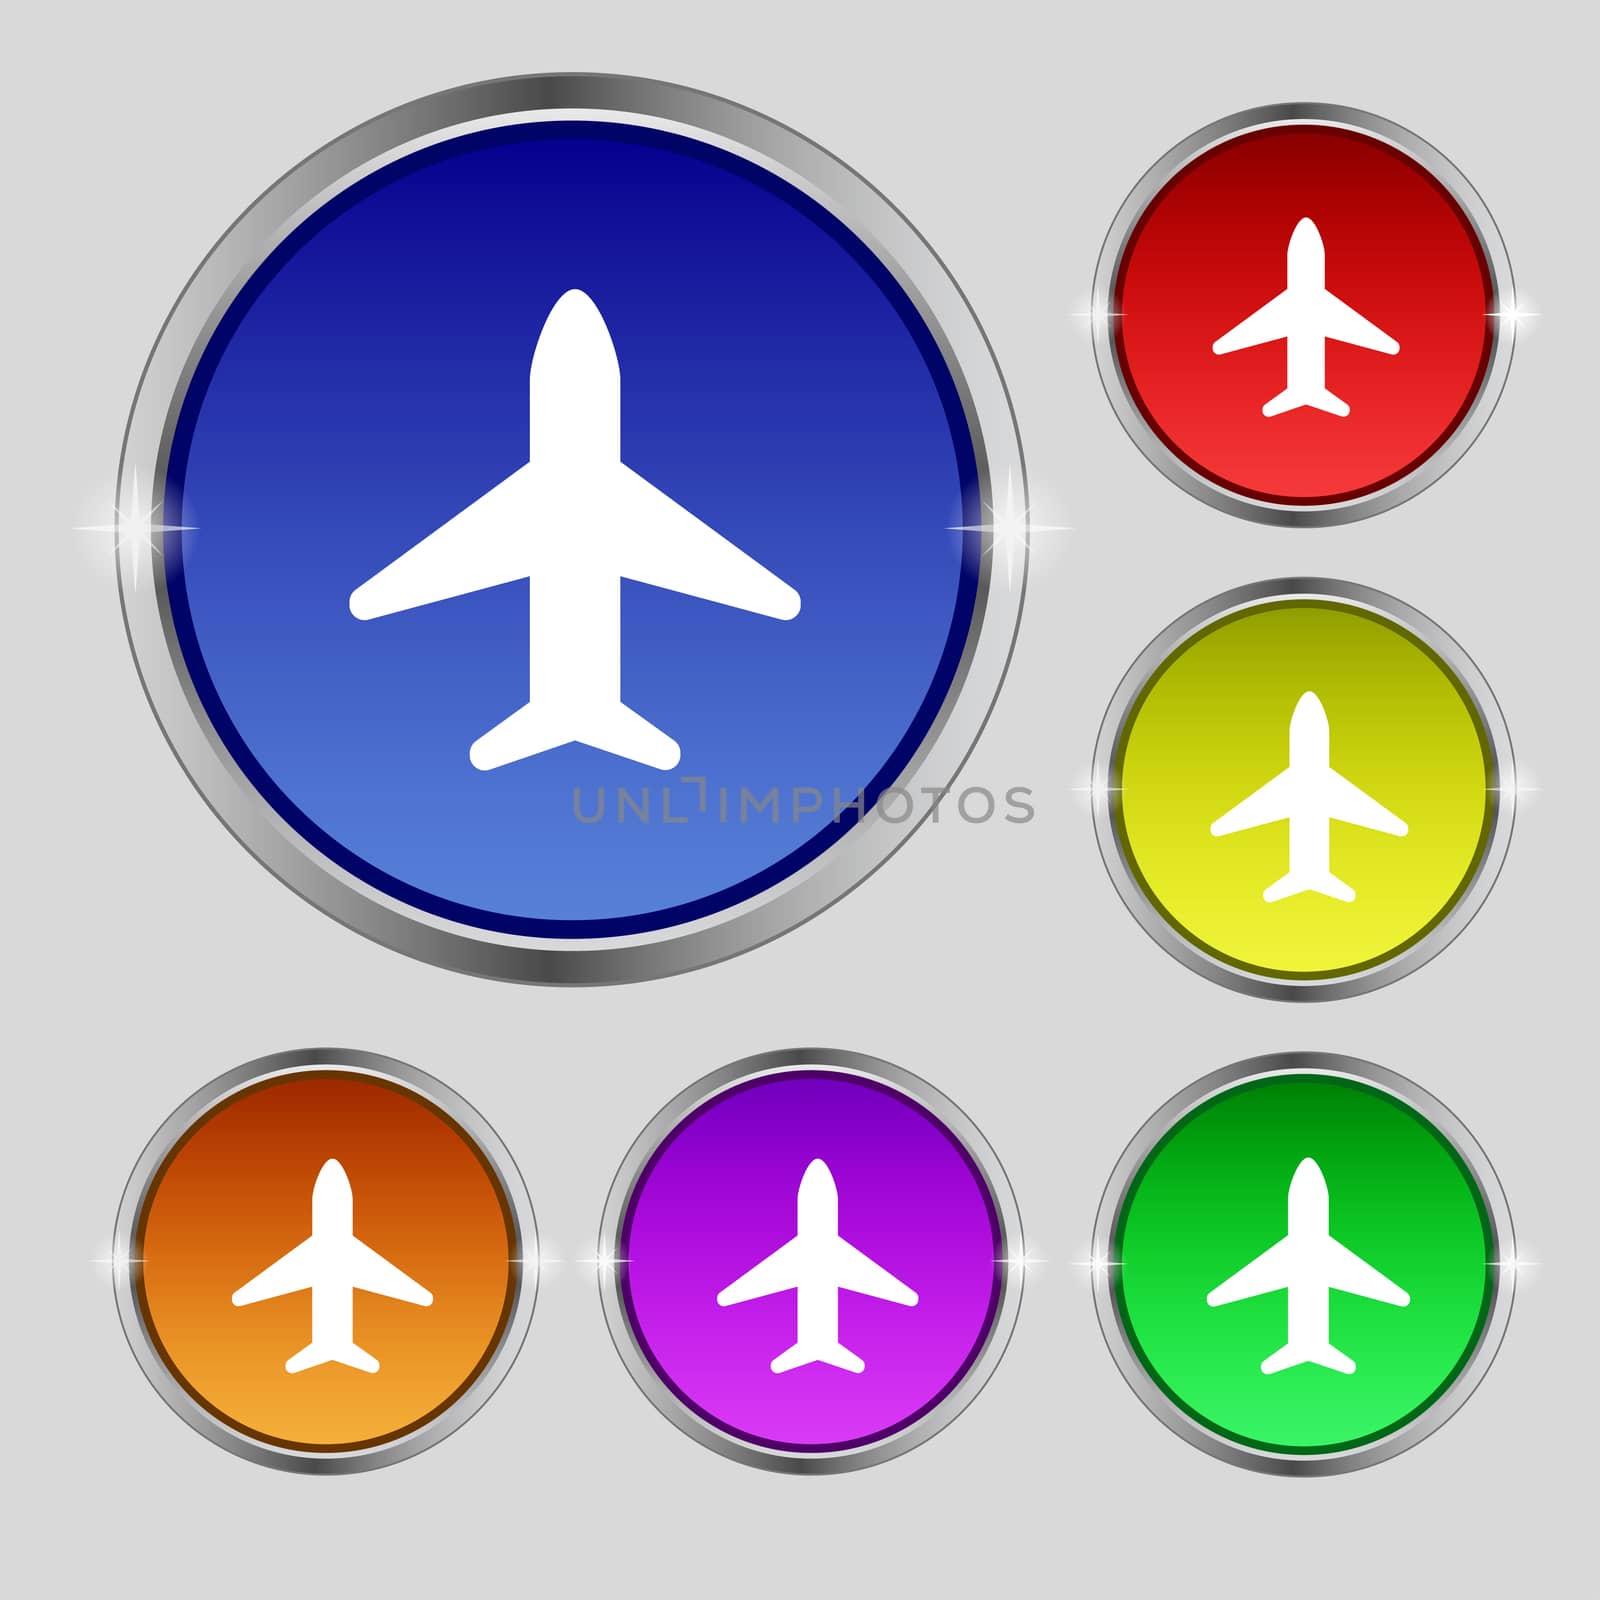 Airplane, Plane, Travel, Flight icon sign. Round symbol on bright colourful buttons. illustration